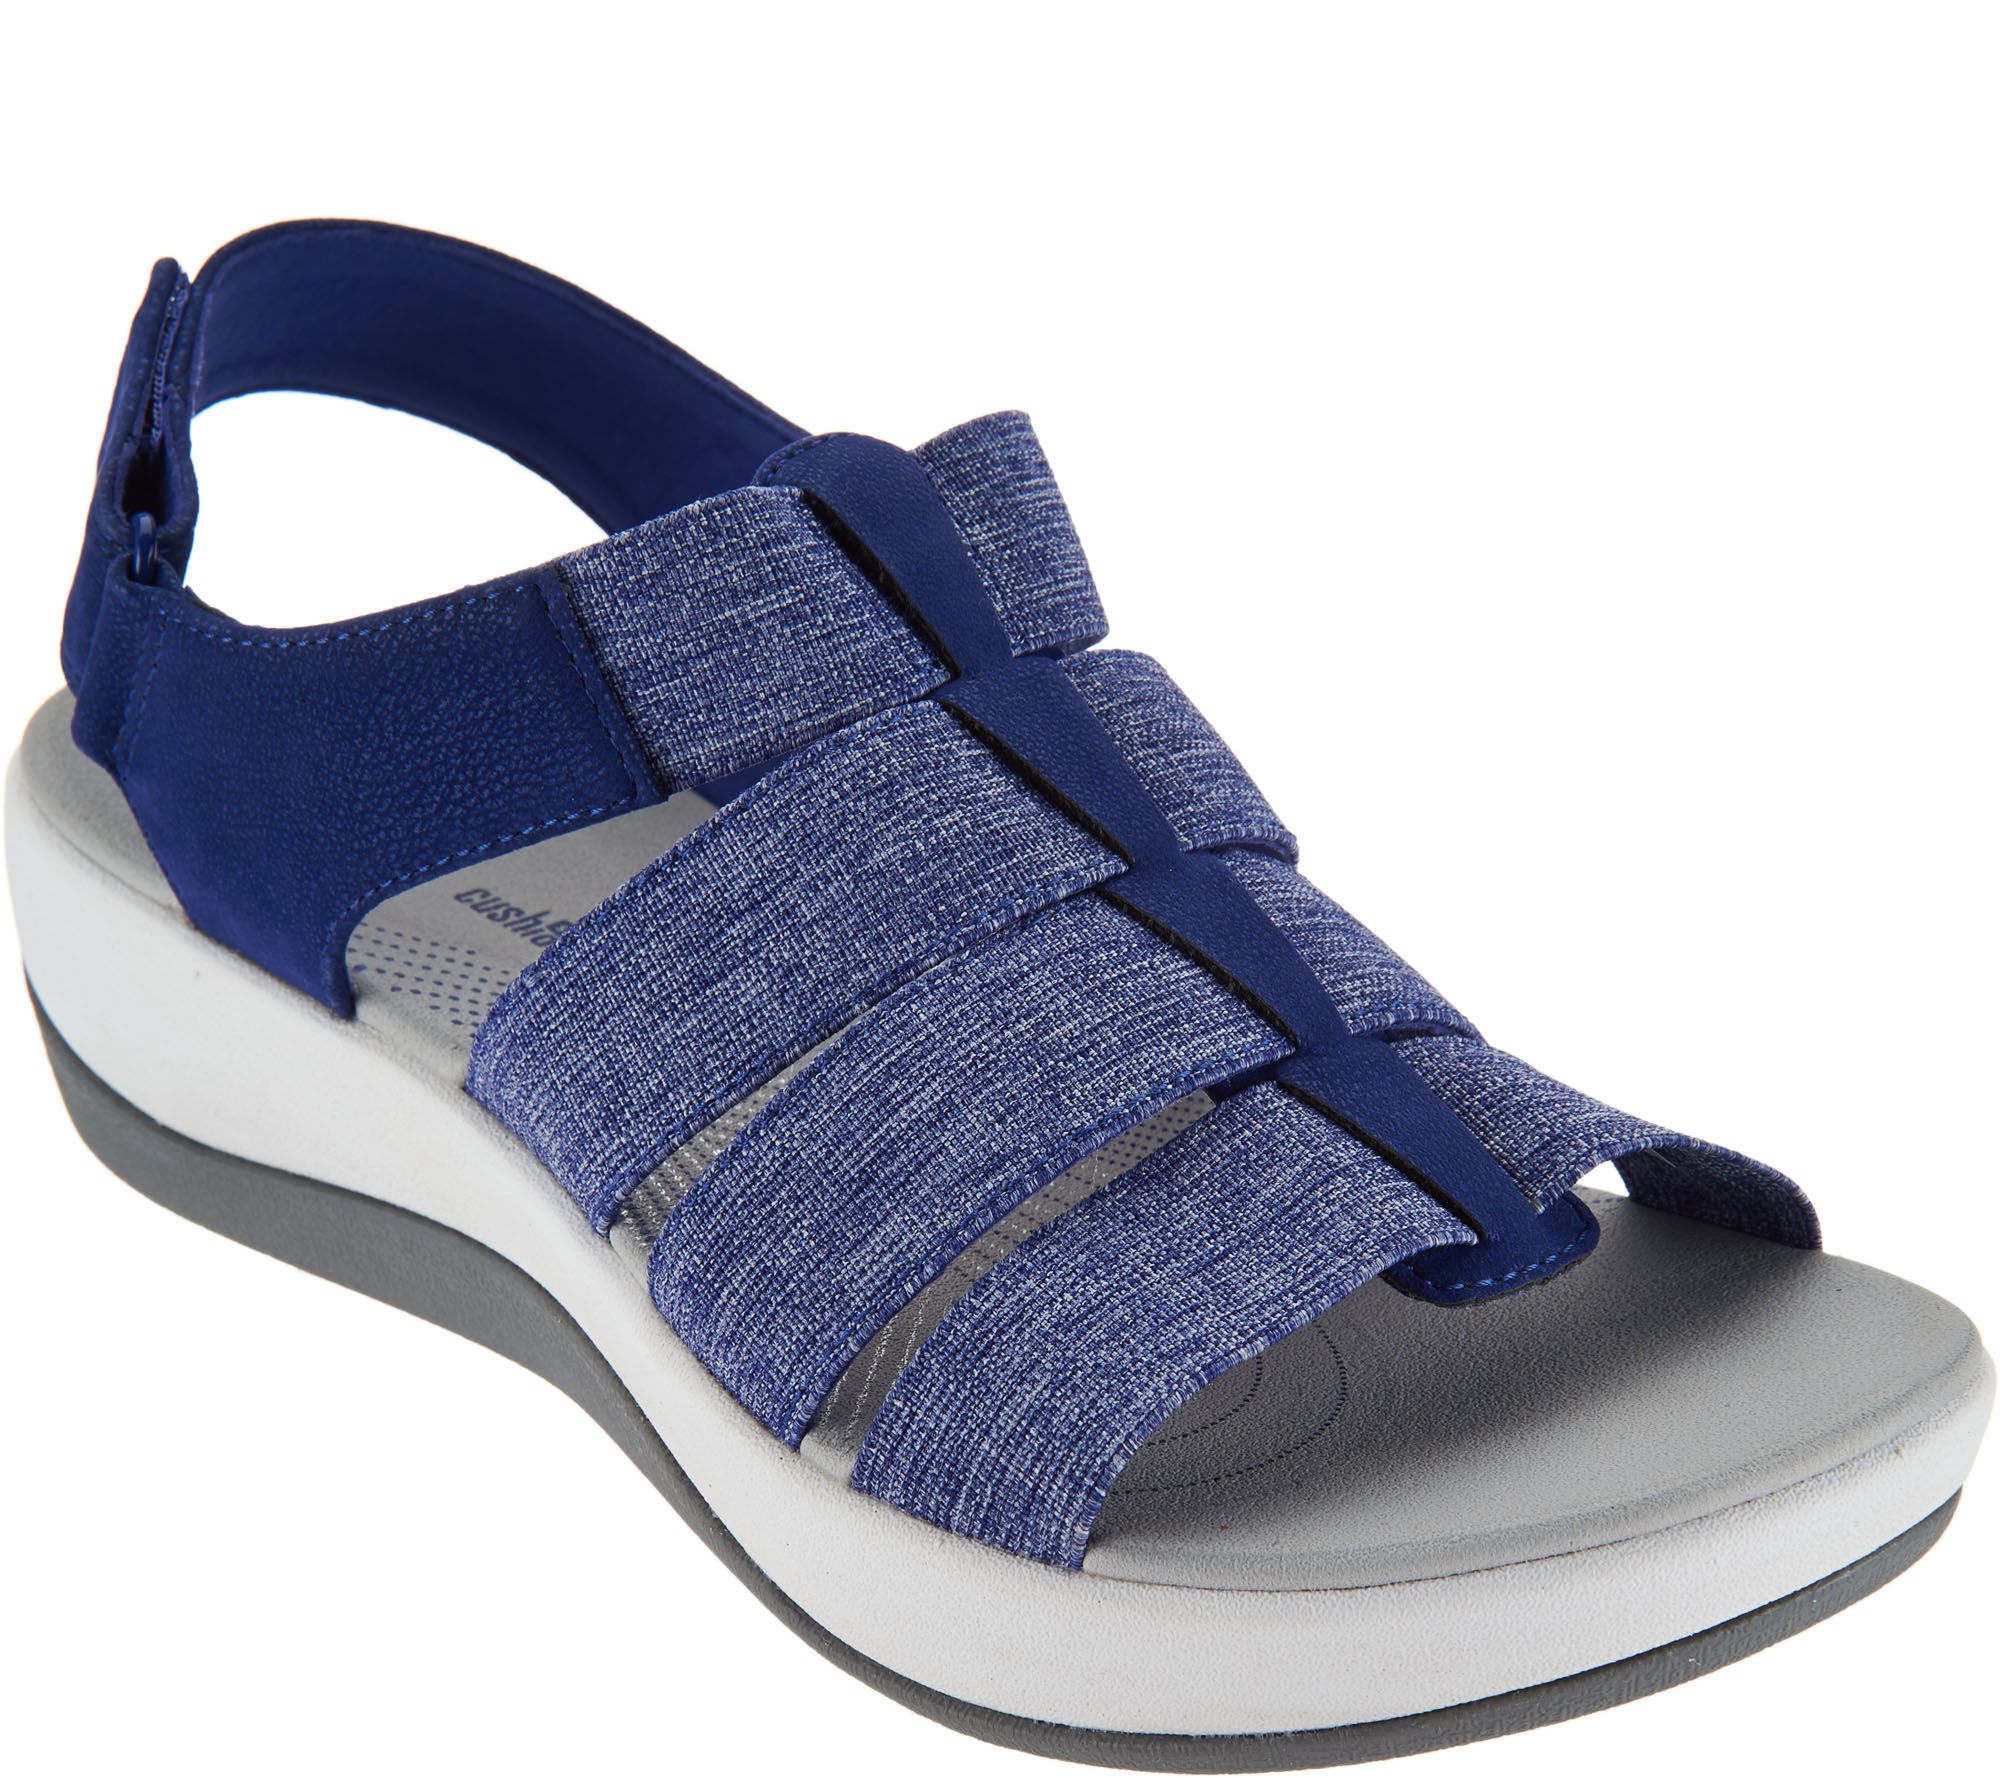 CLOUDSTEPPERS by Clarks Sport Sandals - Arla Shaylie - Page 1 — QVC.com